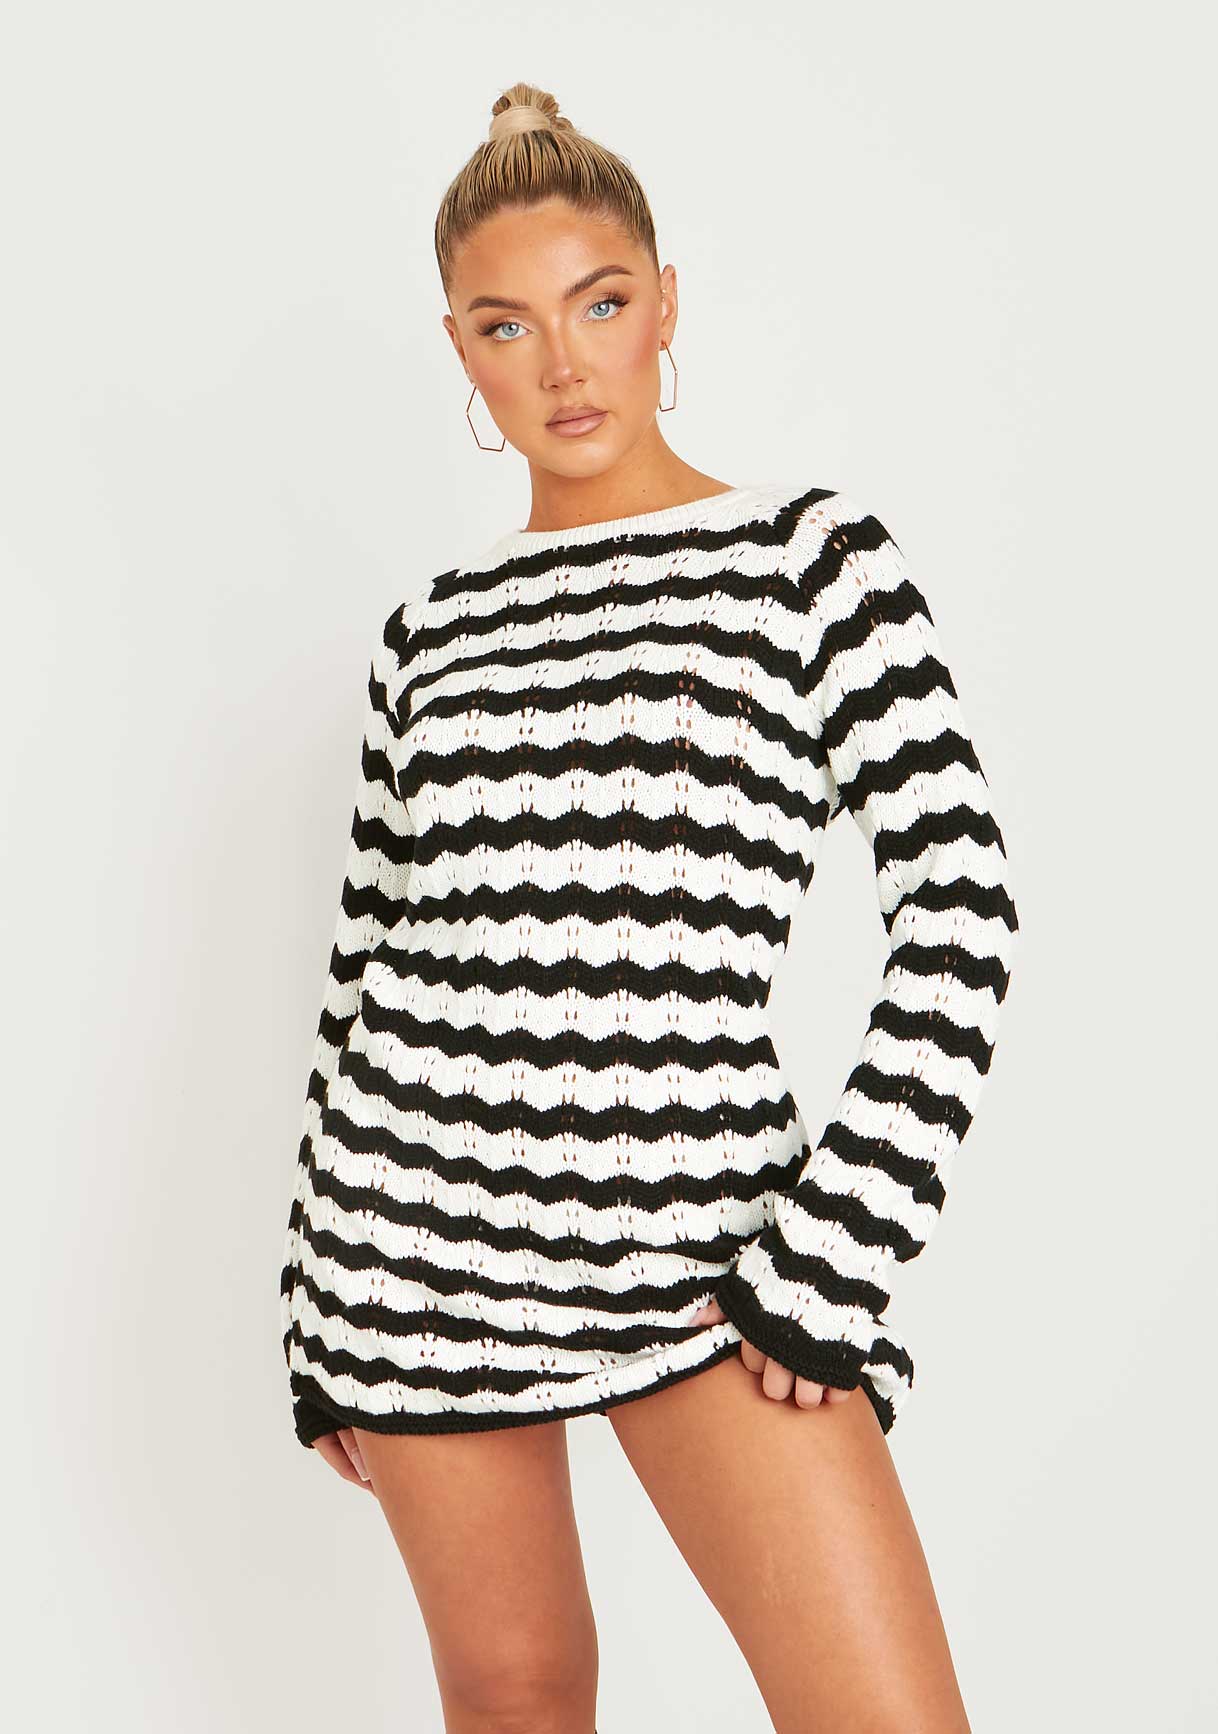 Get Kaylee Black And White Crochet Mini Dress at Unbeatable Prices at ...